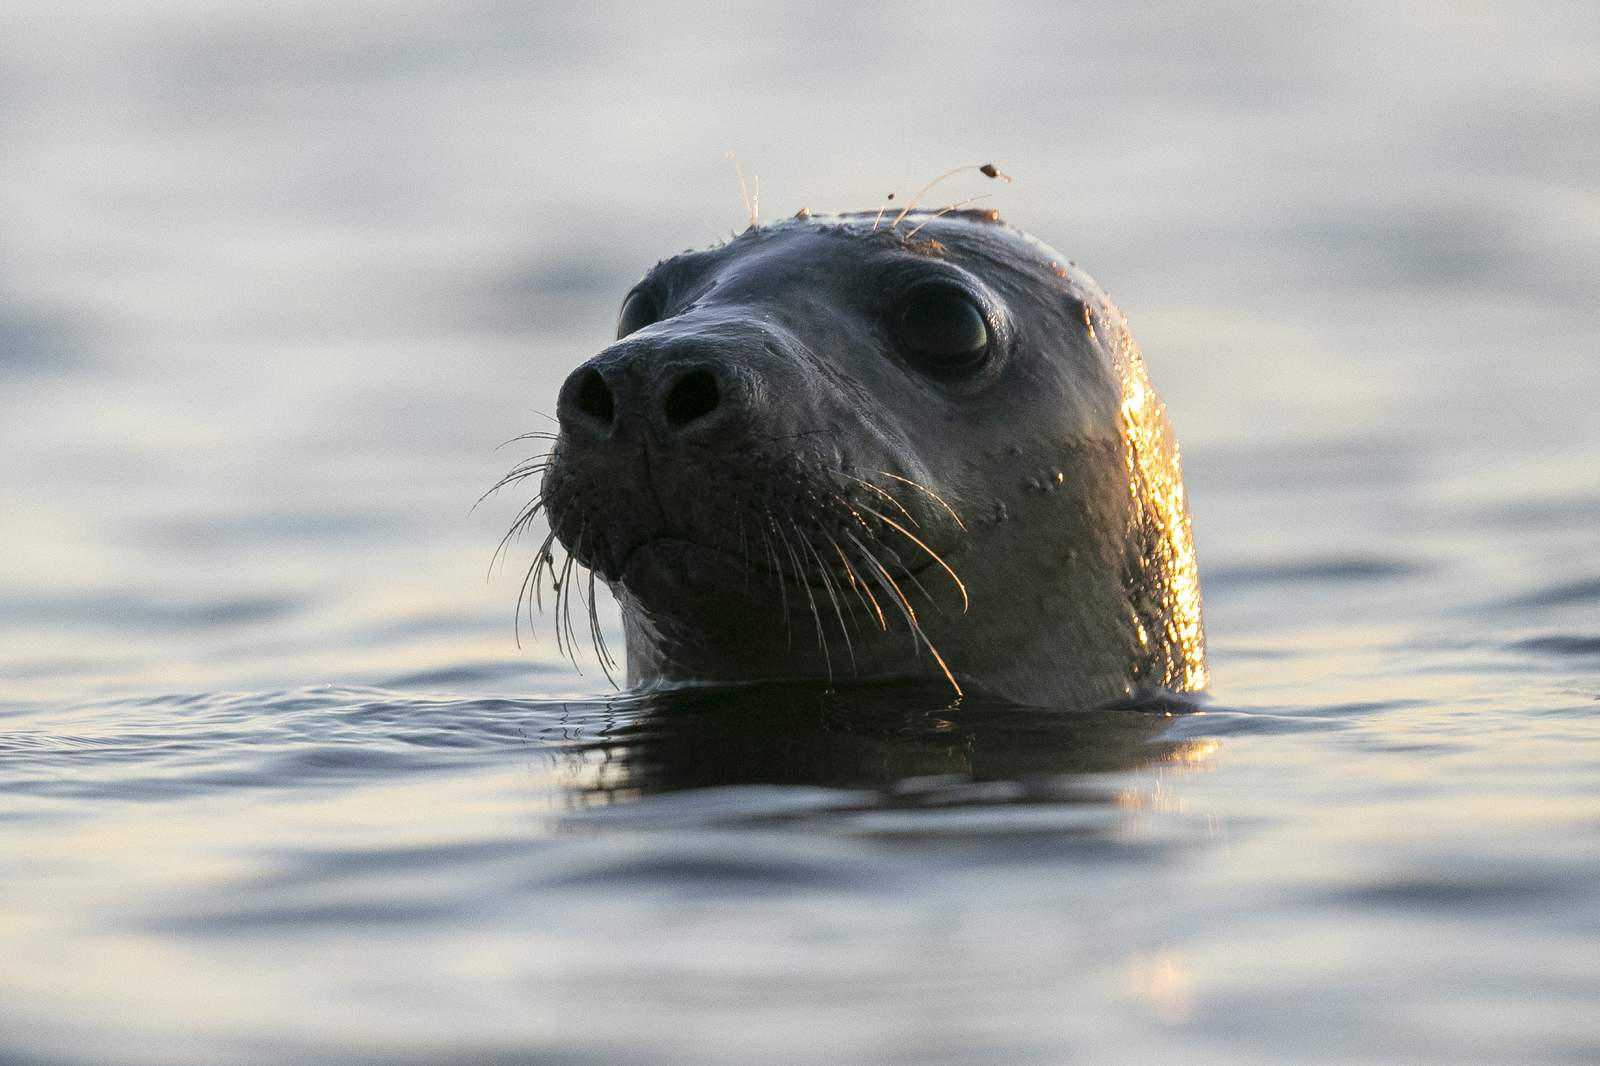 More seals means learning to live with sharks in New England